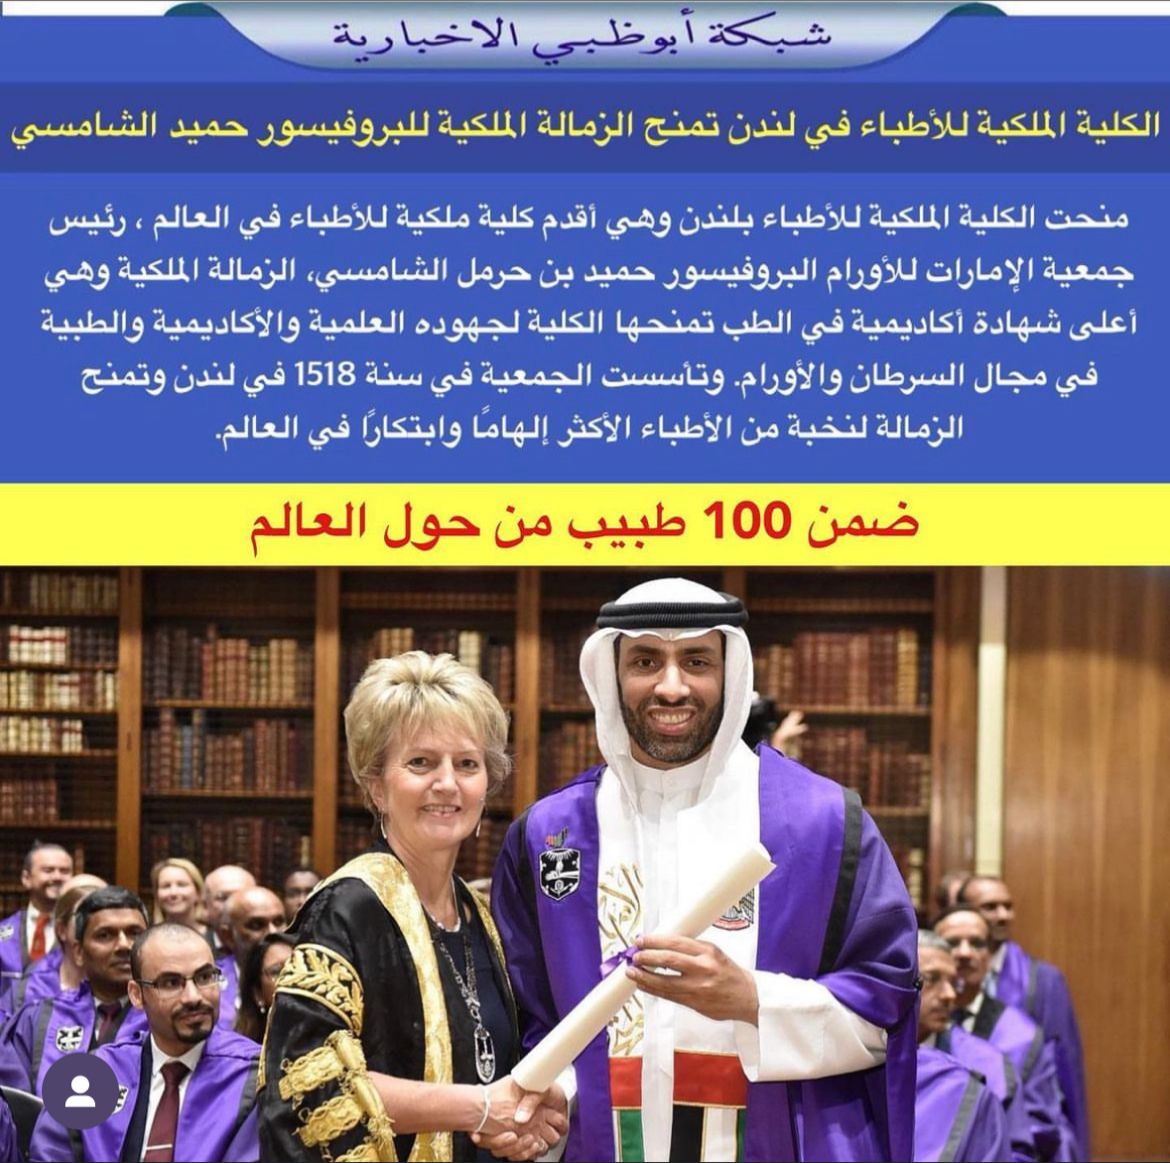 Humaid Al-Shamsi: I was honored to be the First Emirati oncologist to achieve a Fellowship from the prestigious Royal College of Physicians of London.